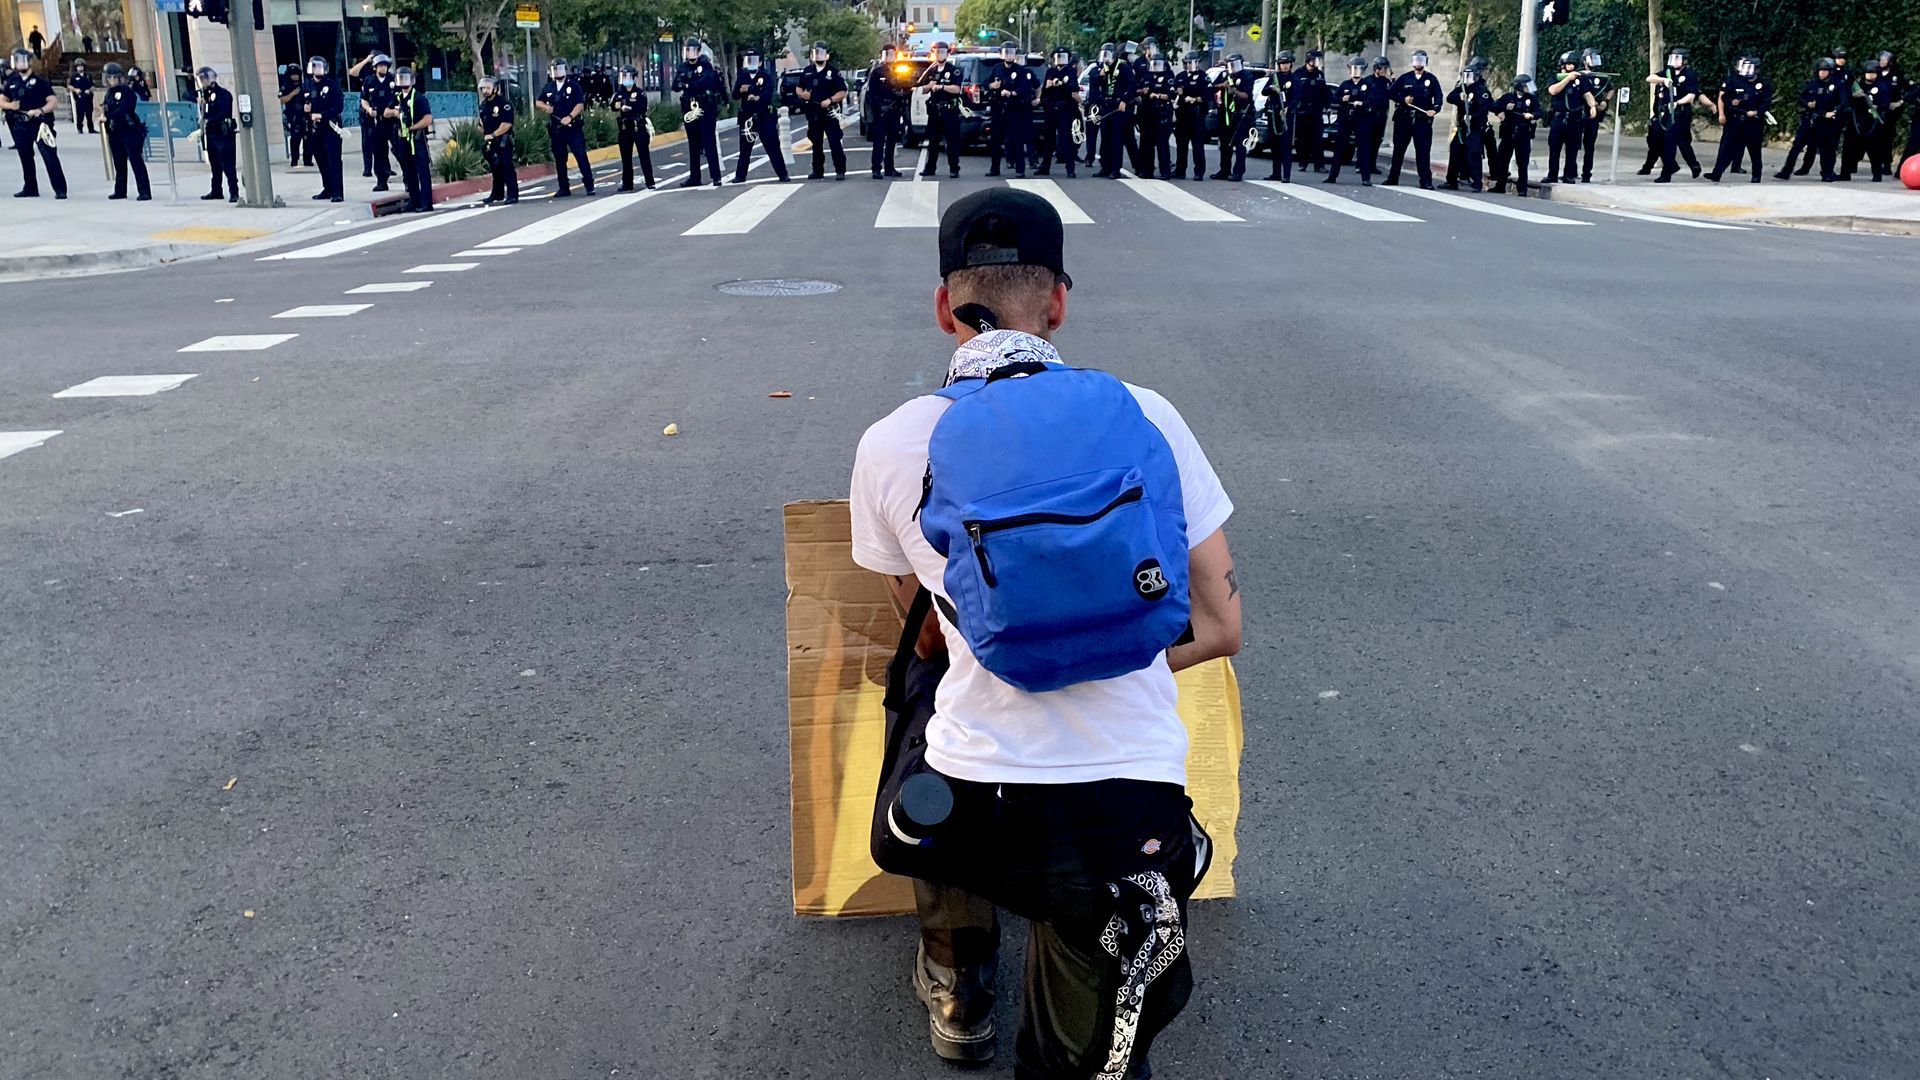 A protestor kneels in front of police